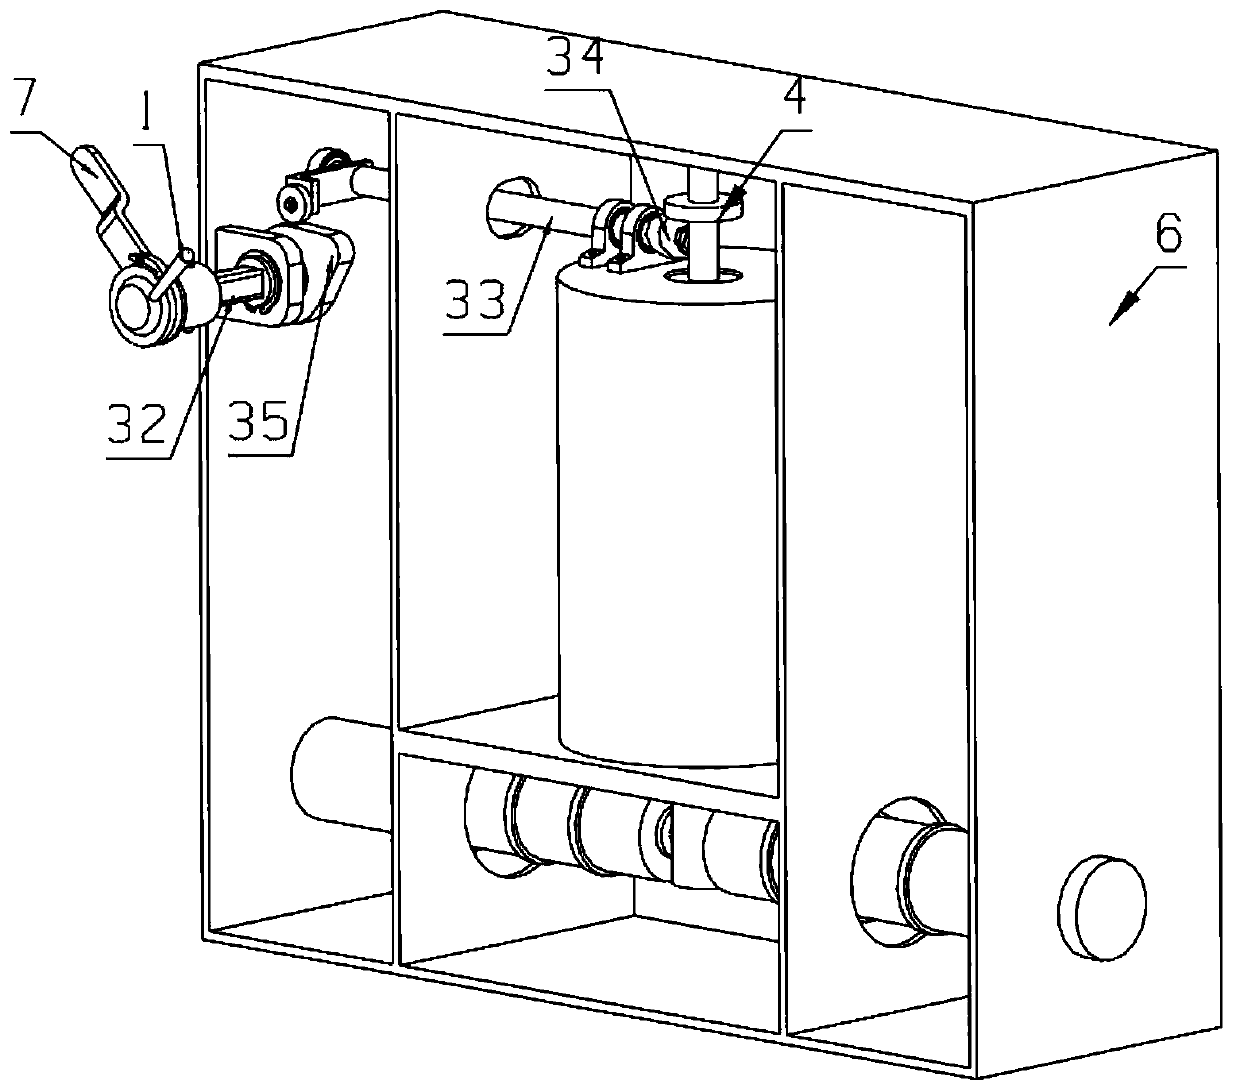 Tripping mechanism of permanent magnet circuit breaker, permanent magnet circuit breaker and switchgear